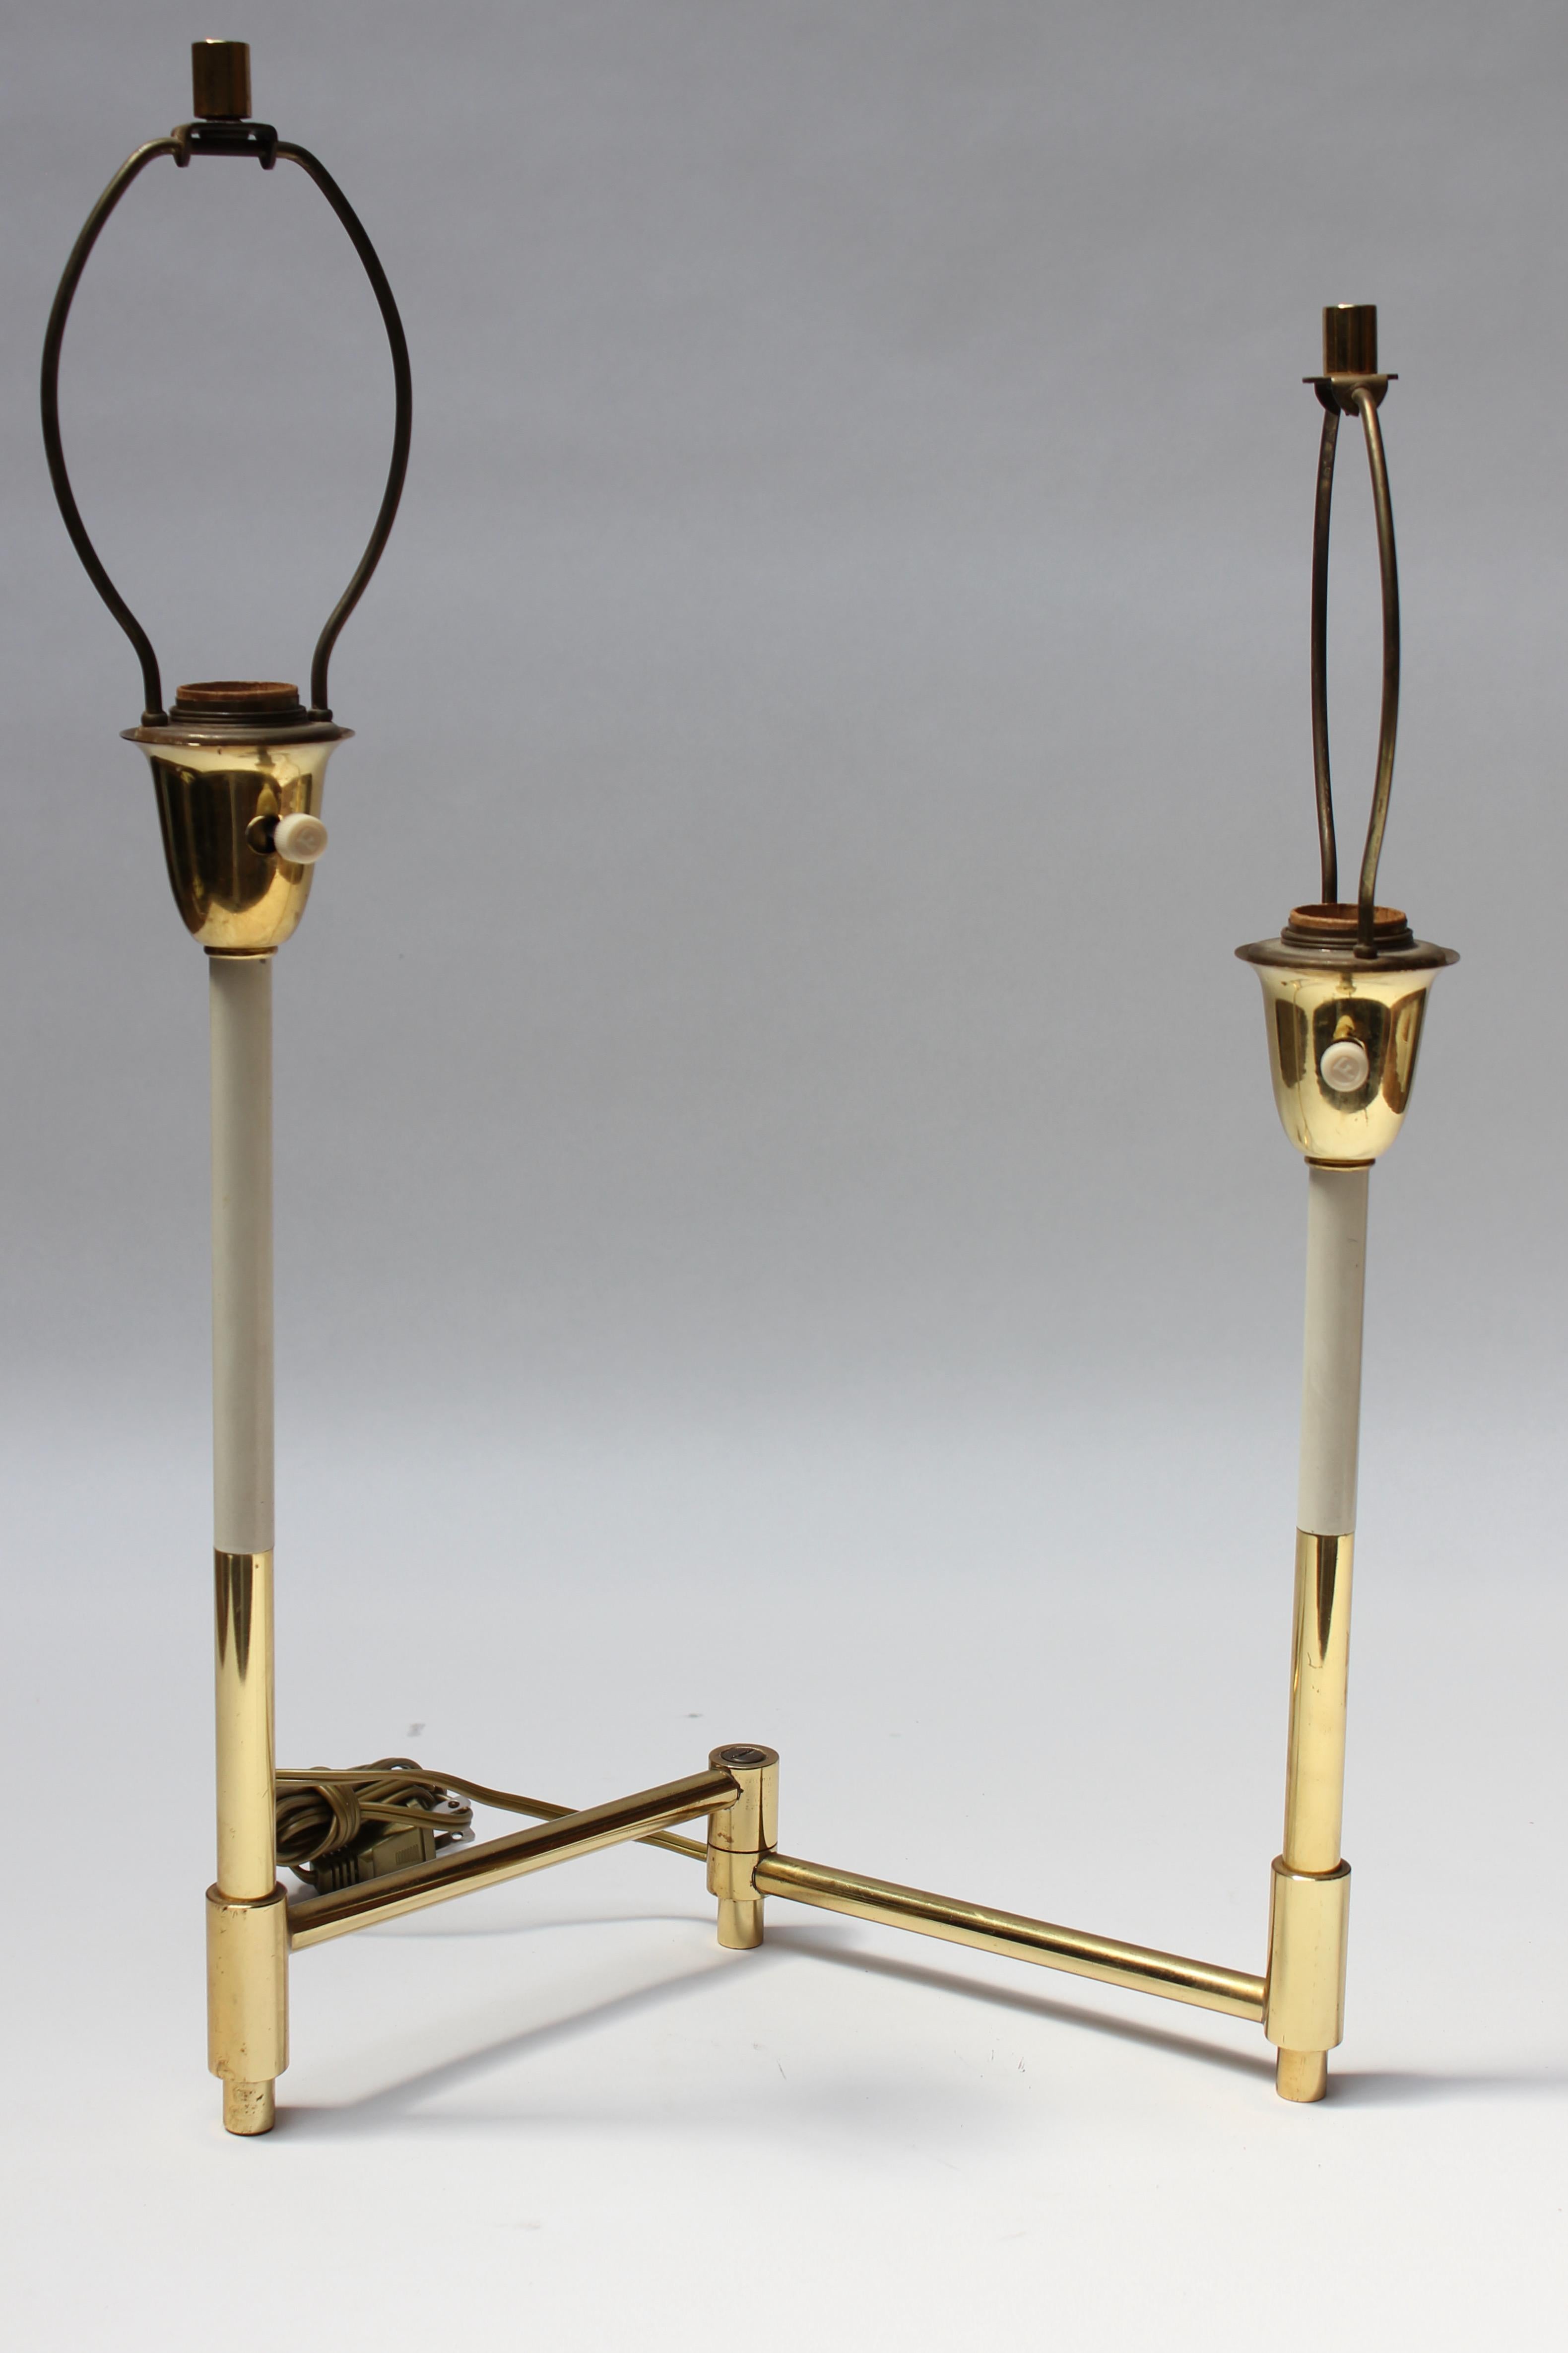 Uncommon Laurel pivoting two fixture brass and off-white painted metal table lamp. The stems splay apart in an accordion style, and the length can be extended from 4.25